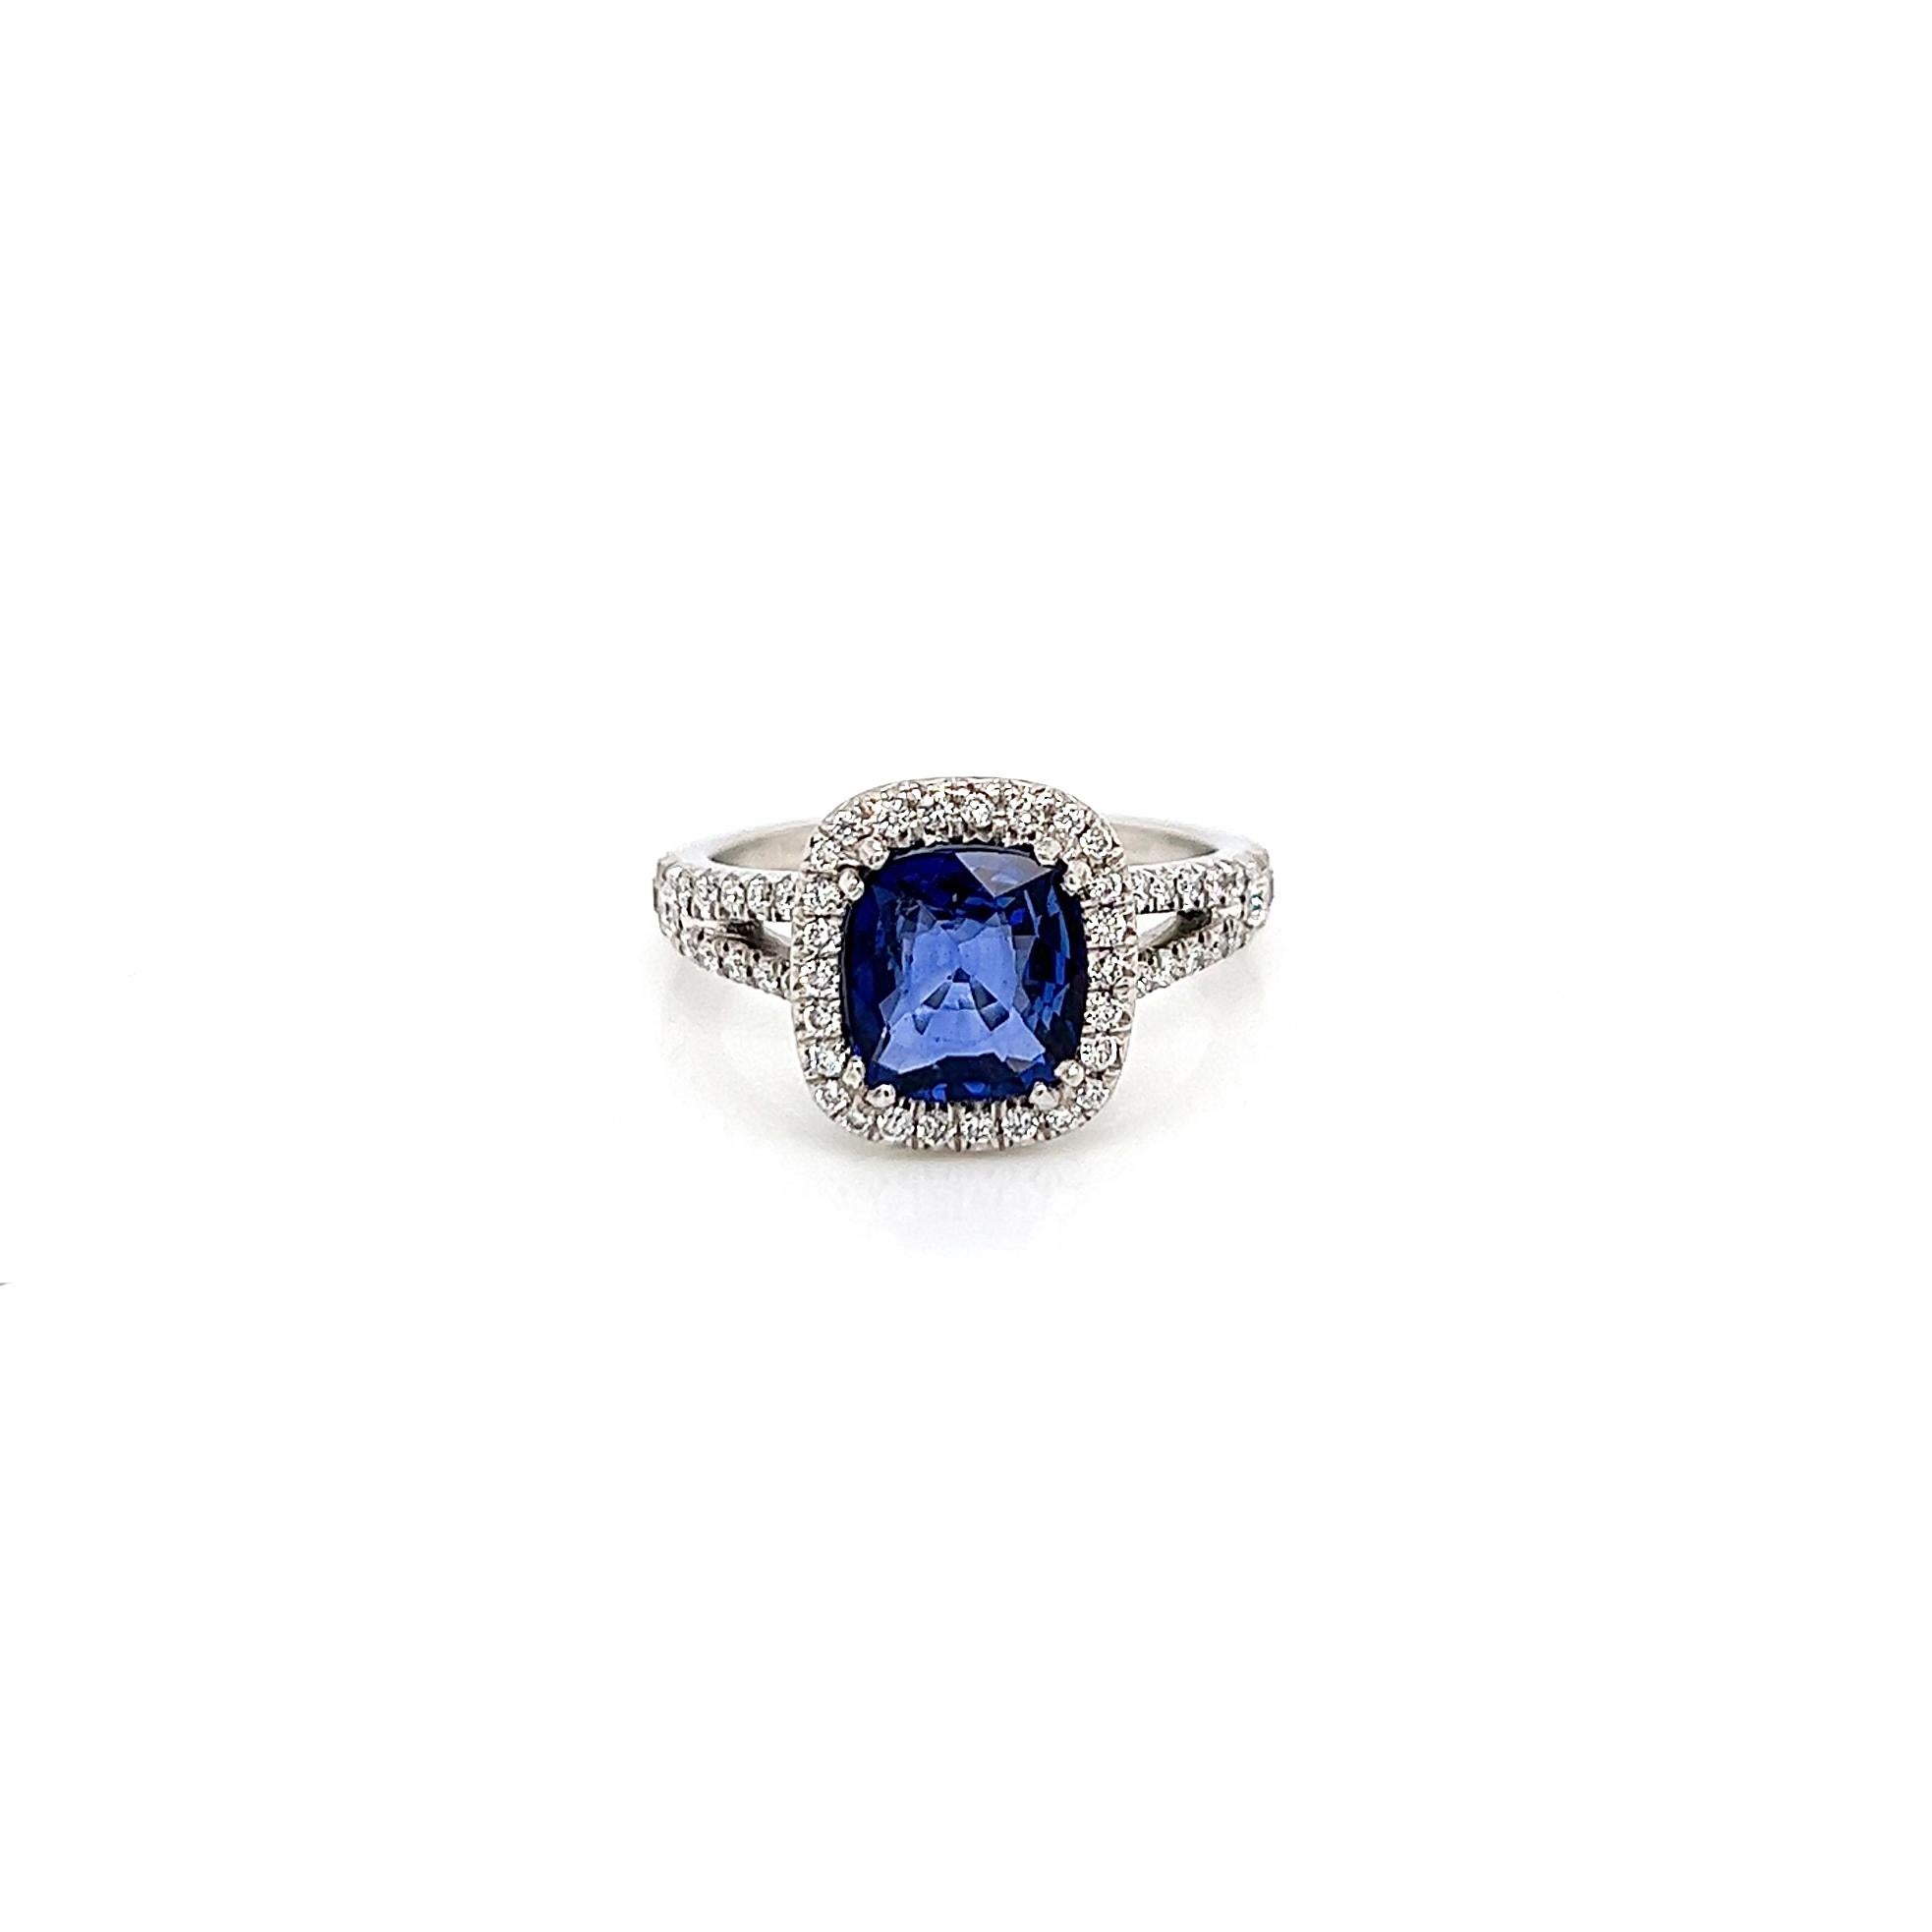 3.10 Total Carat Sapphire and Diamond Halo Pave-Set Ladies Ring

-Metal Type: Platinum
-2.21 Carat Cushion Cut Natural Blue Sapphire, Heated  
-0.89 Carat Round Natural side Diamonds. F-G Color, VS Clarity 

-Size 6.0

Made in New York City.